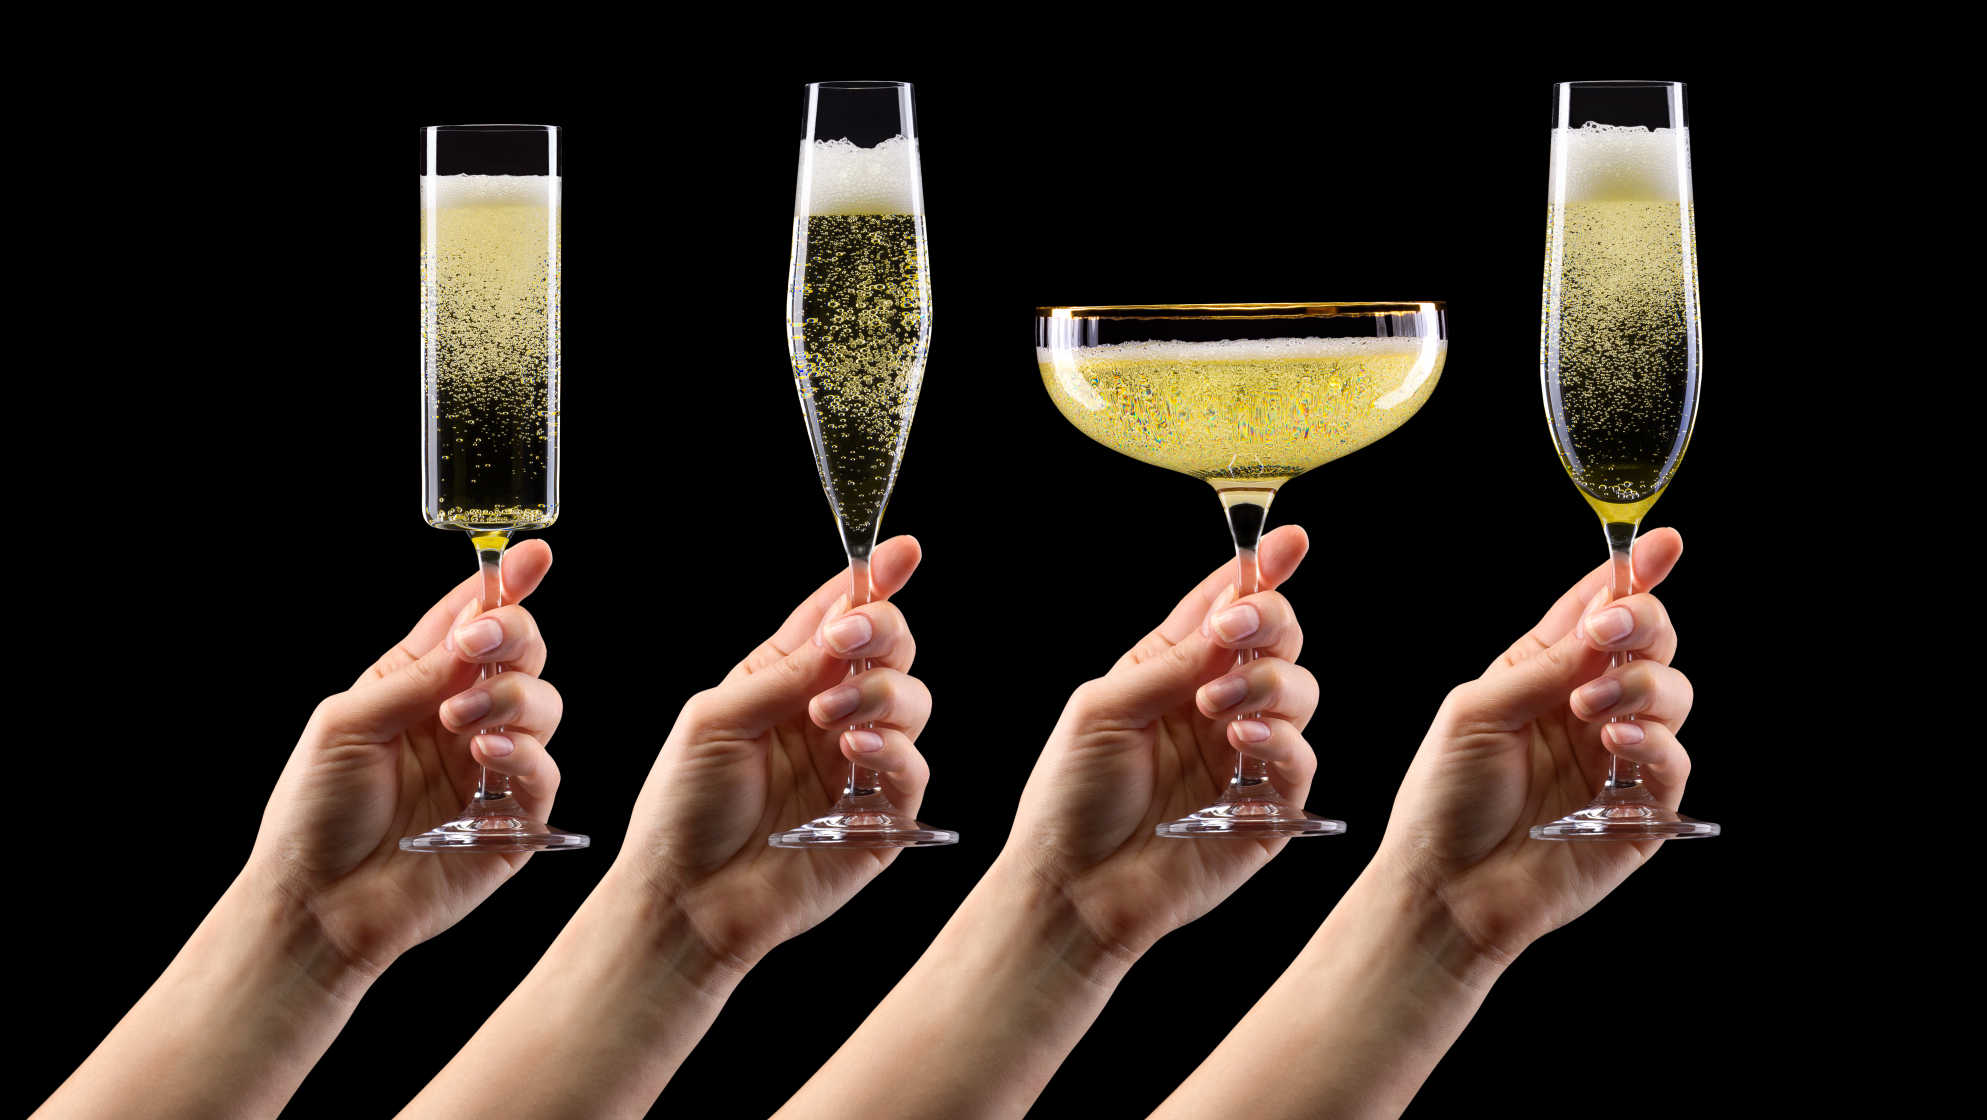 Holding different glasses of sparkling wine and champagne